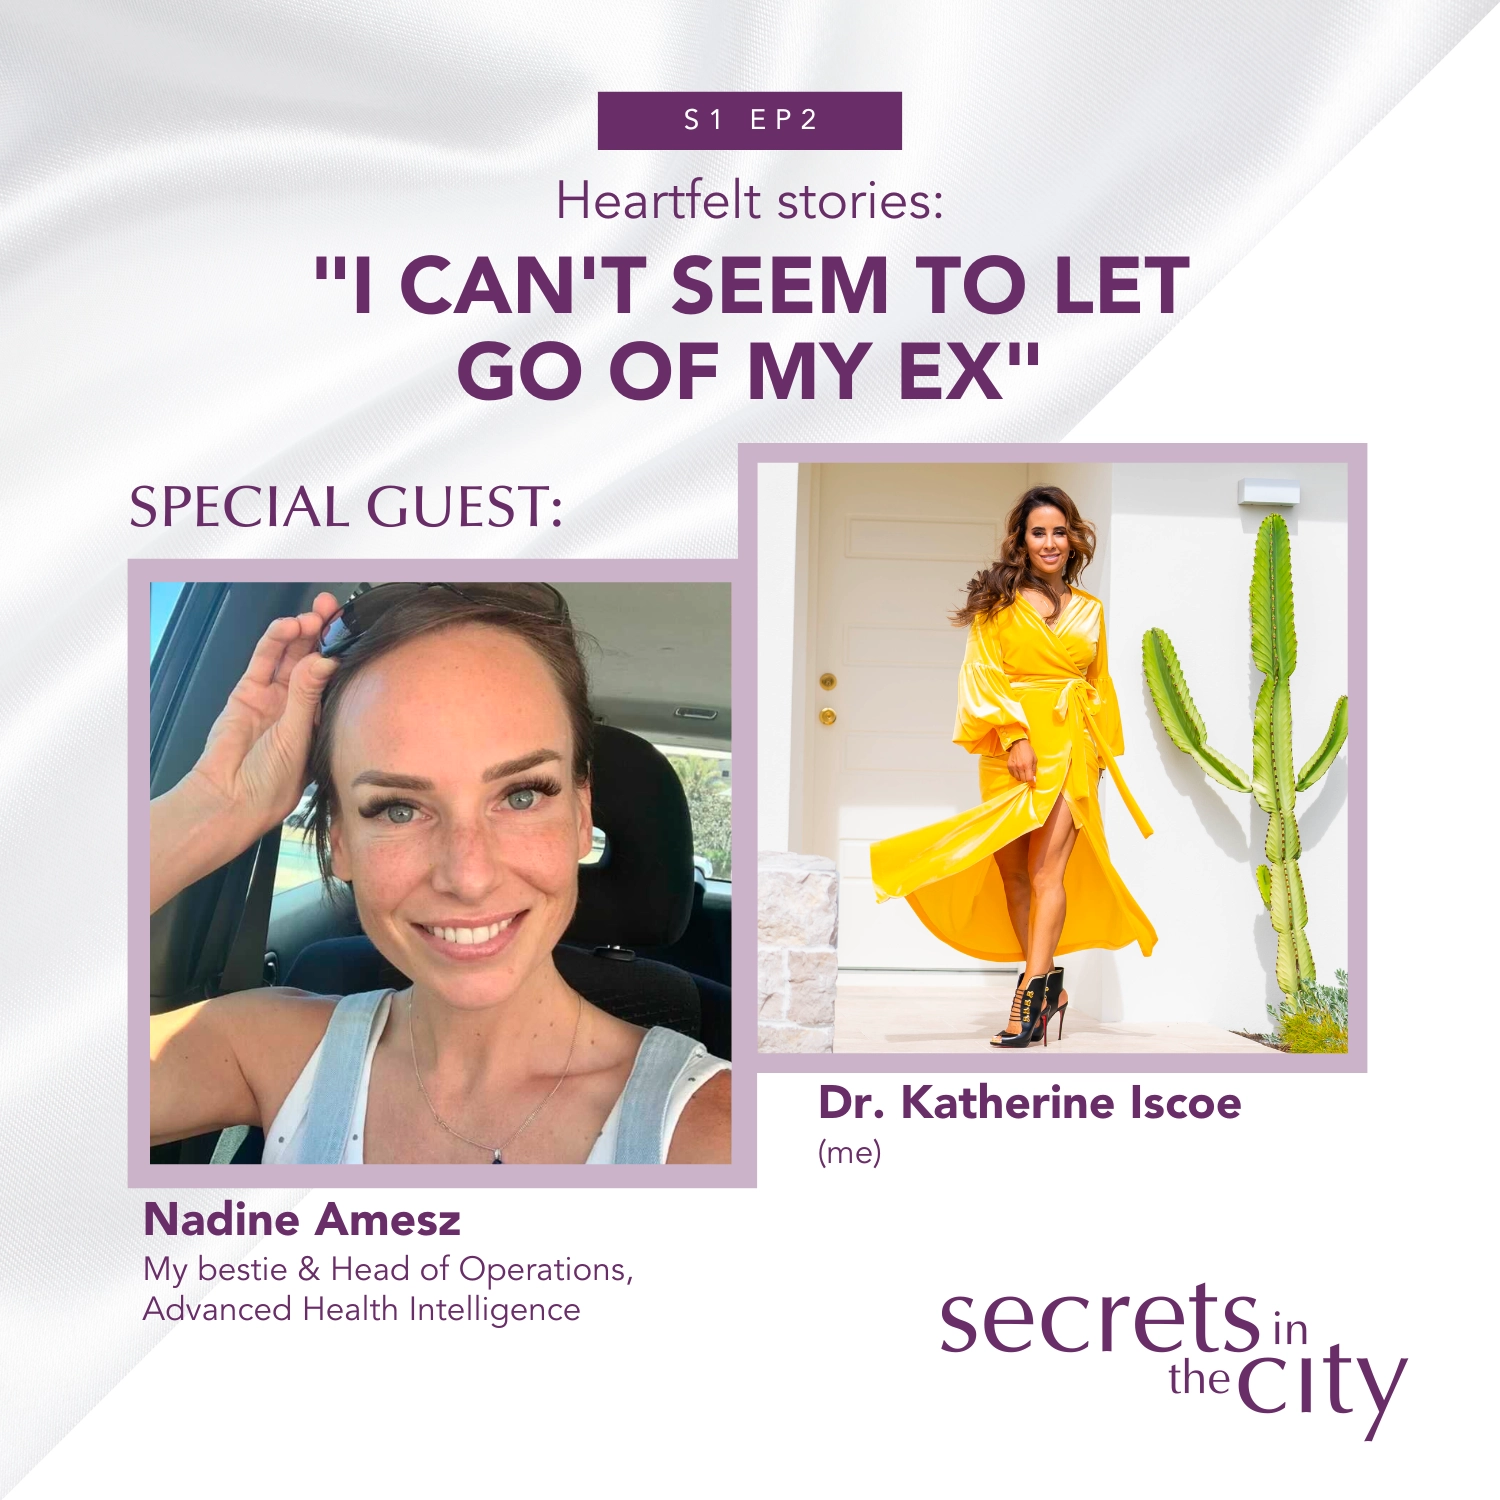 I Can't Seem to Let Go of My Ex - Dr. Katherine - Secrets in the City podcast cover featuring photos of Nadine Amesz and Dr. Katherine Iscoe